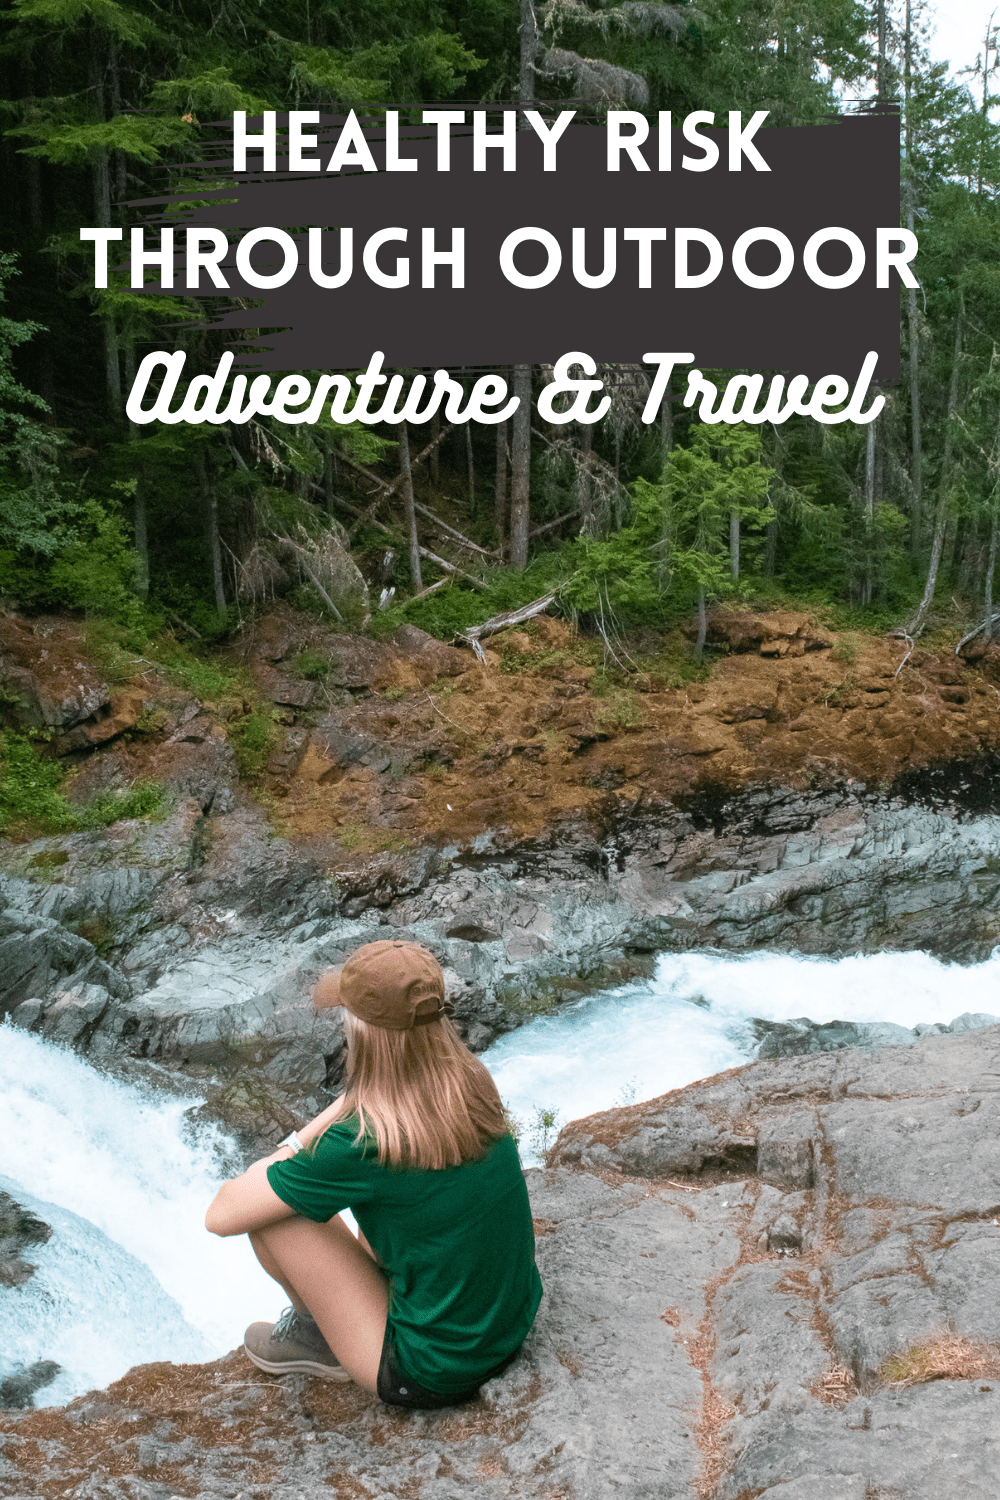 Helping Kids Take Healthy Risk Through Outdoor Adventure and Travel - Risk Taking Teens and Tweens